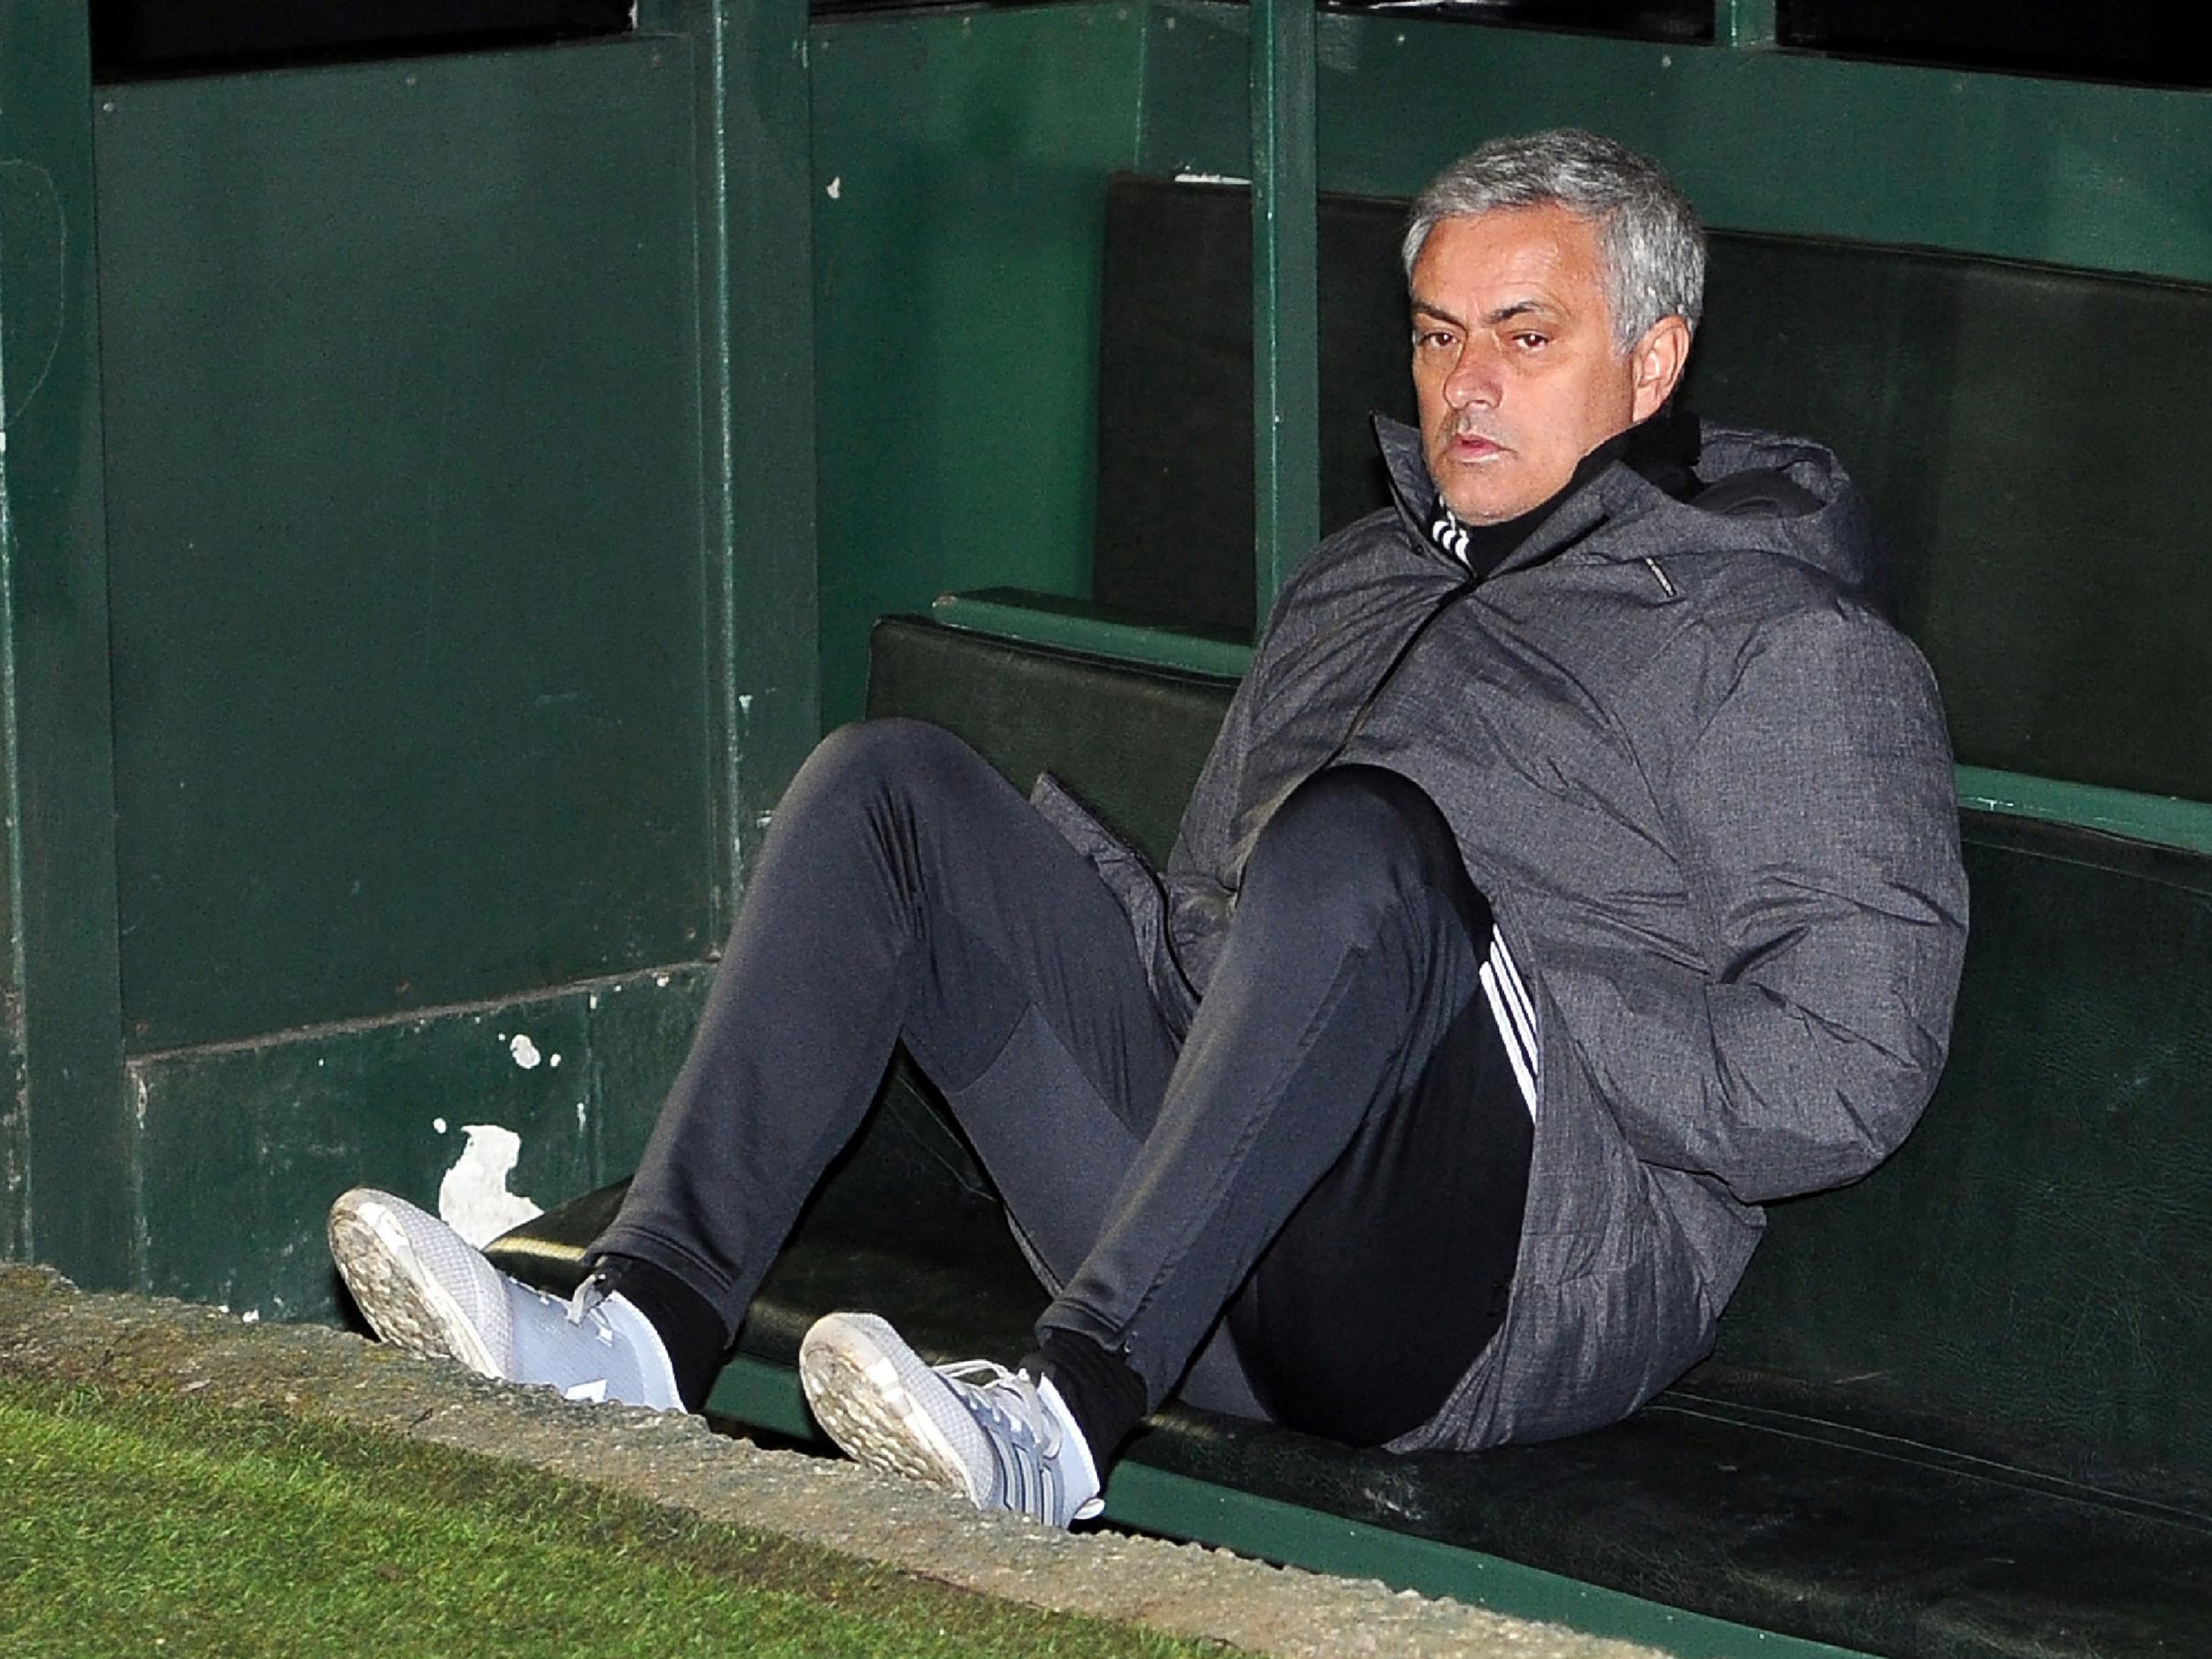 &#13;
Mourinho praised Sanchez's coolness during the game &#13;